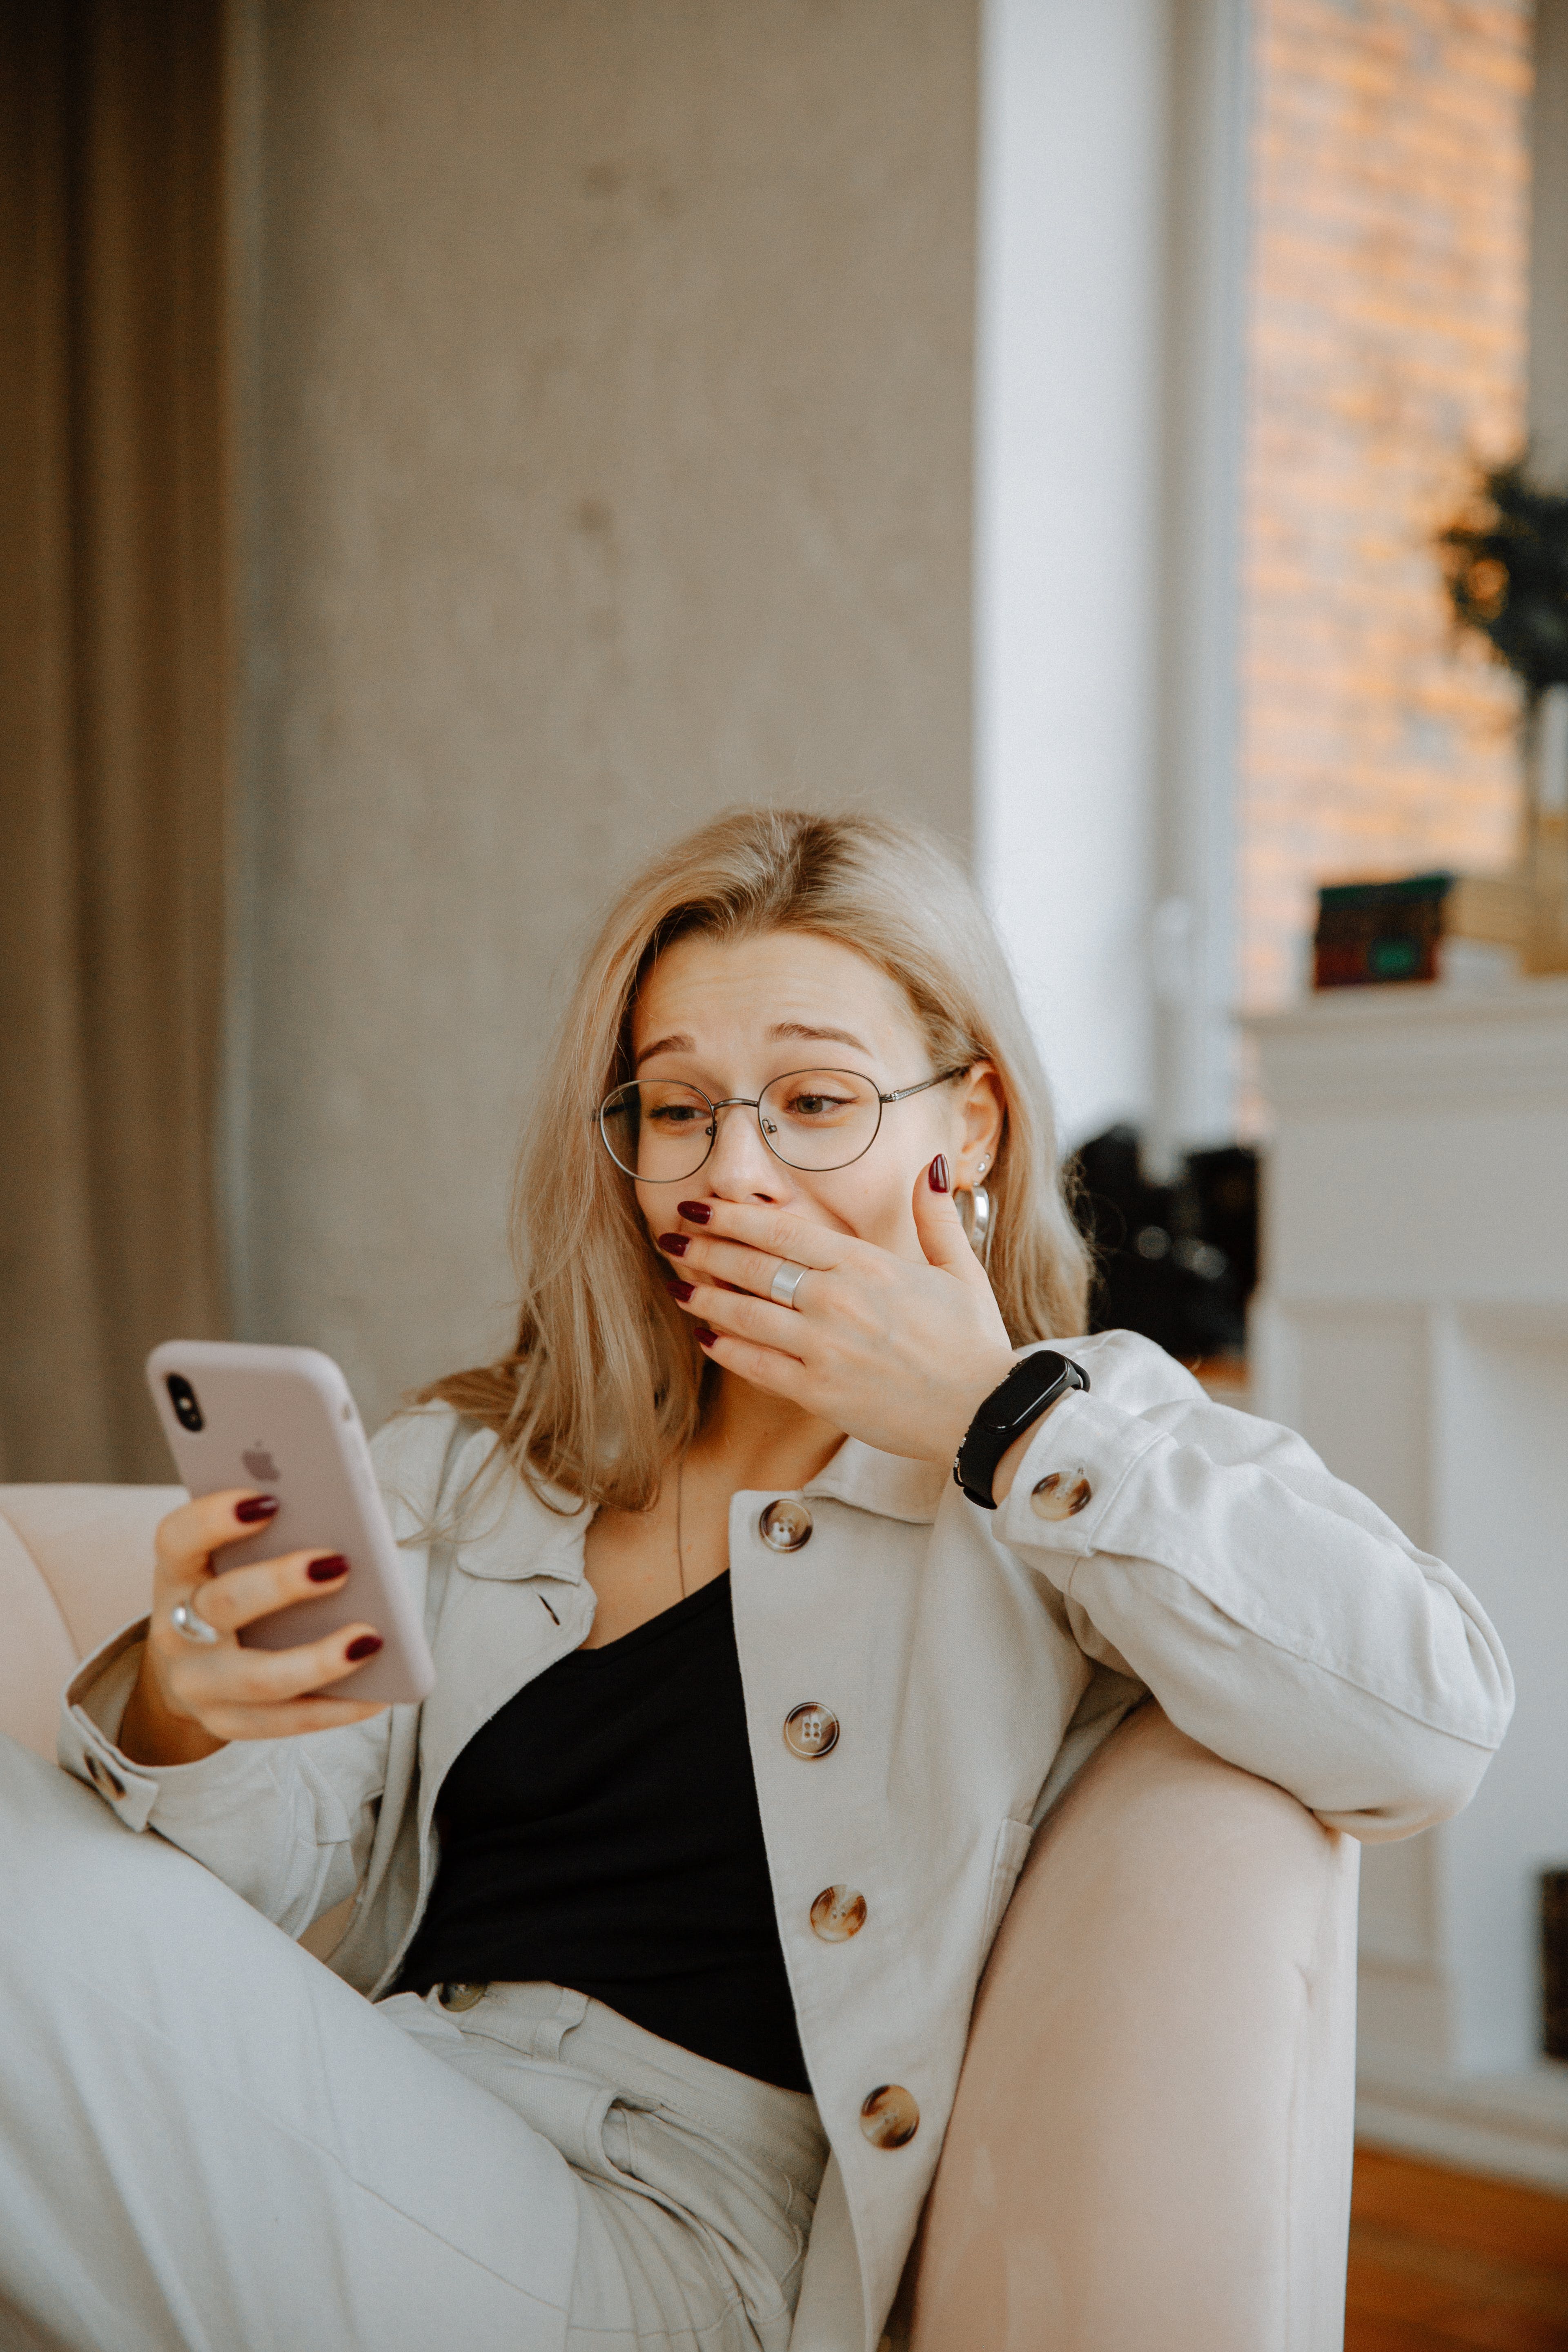 A woman holding a smartphone while covering her mouth | Source: Pexels